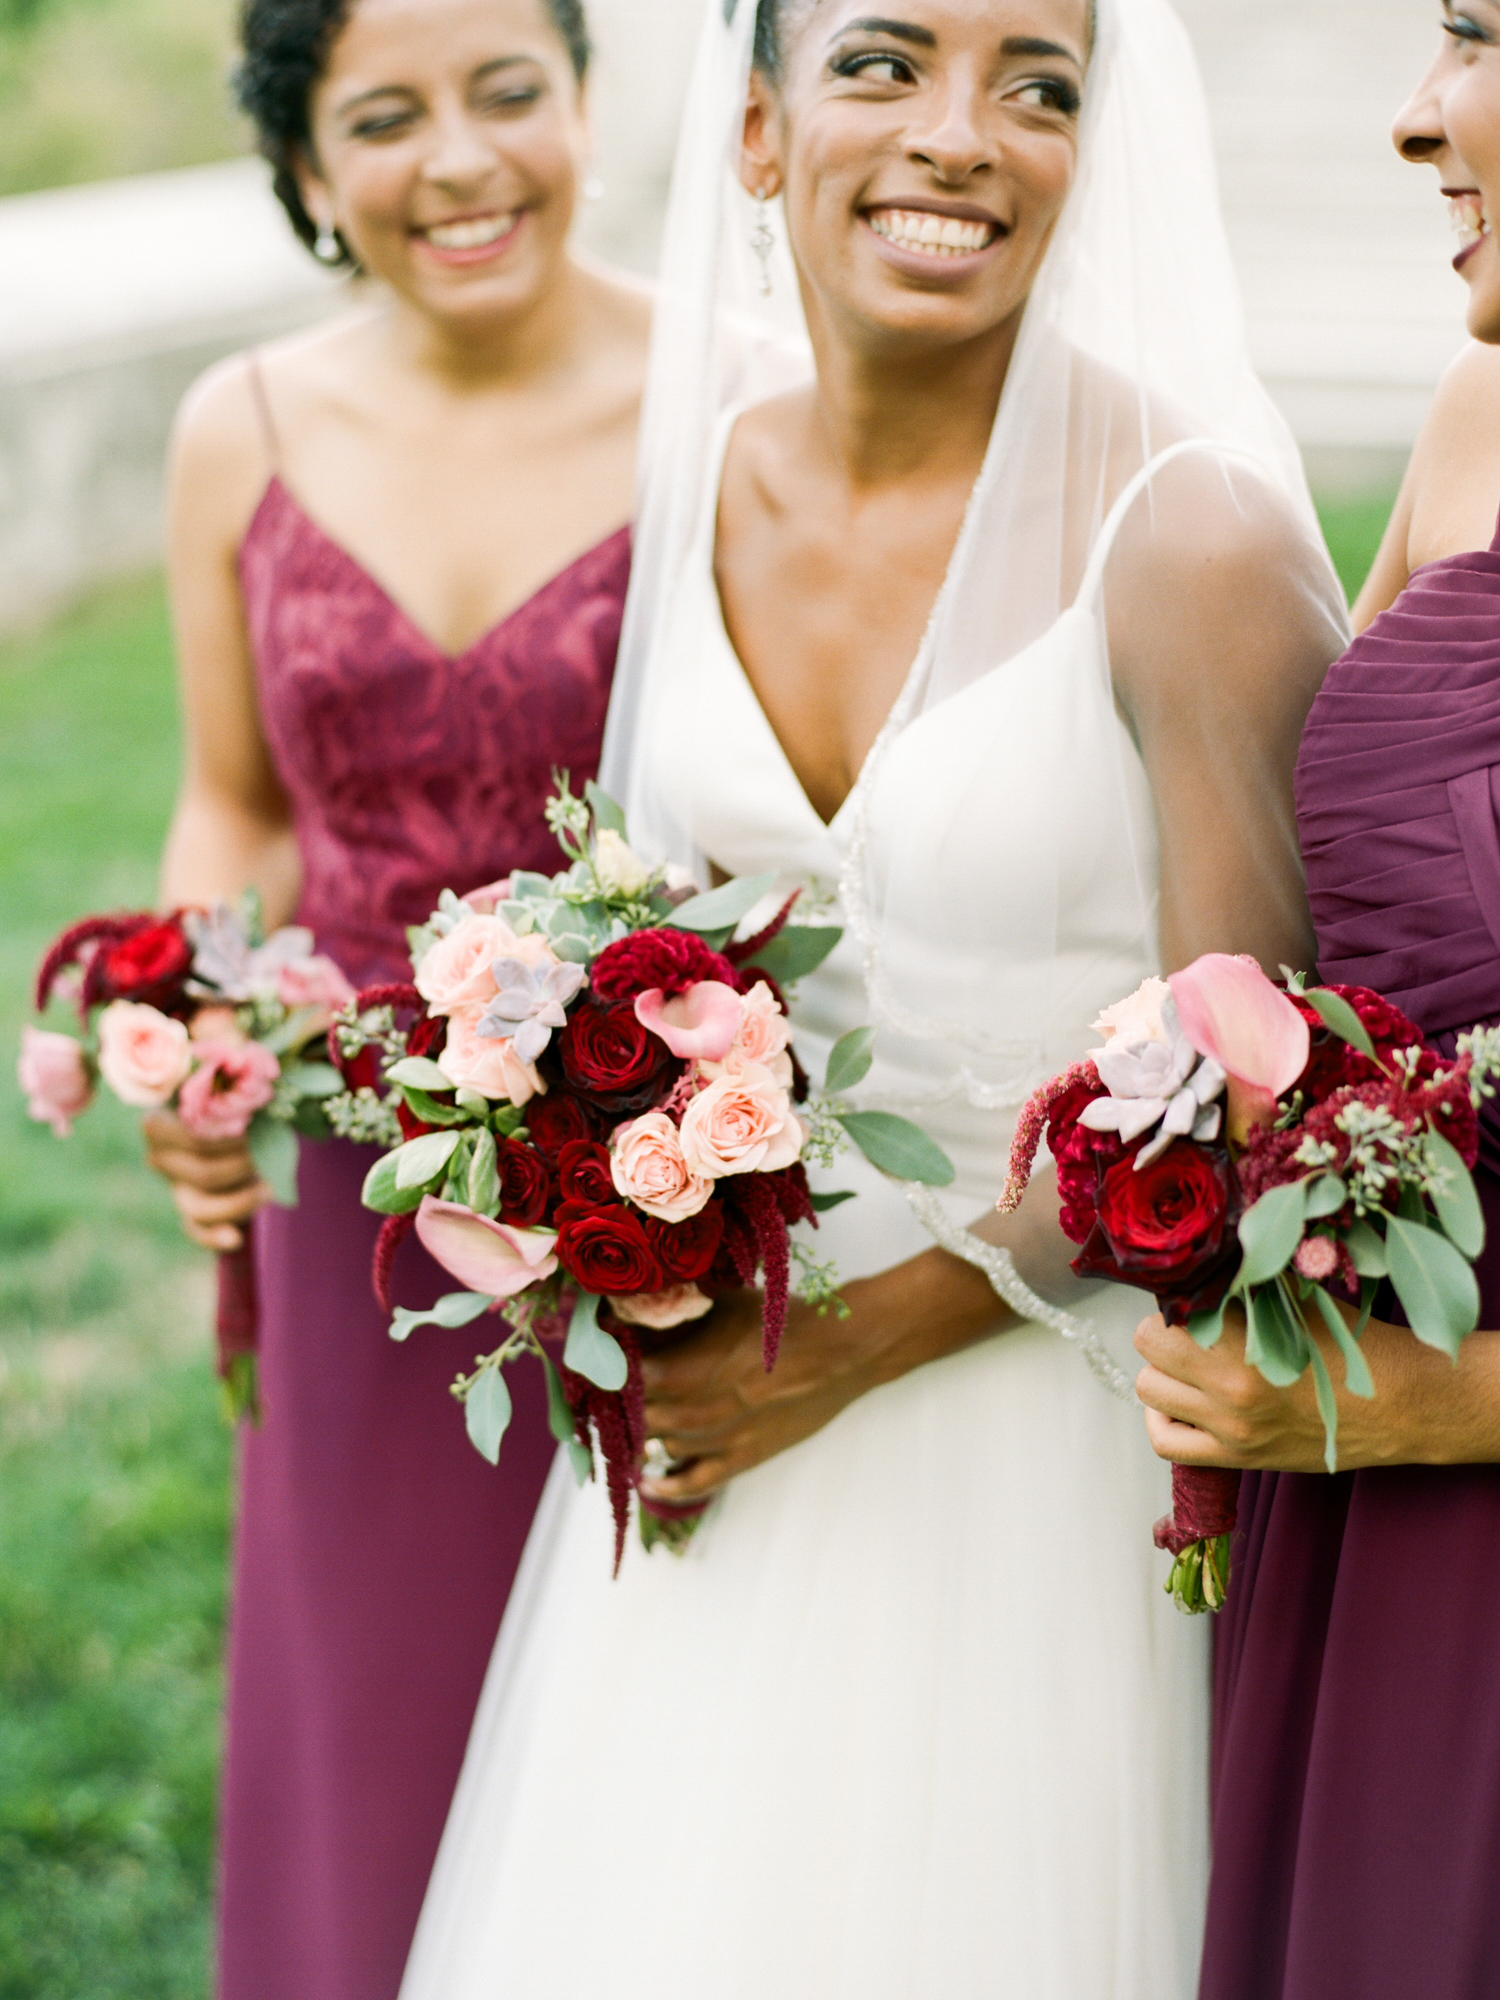 Happy bride with bouquet stands with bridesmaid in maroon dresses and rose and calla lily bouquets | Mary Dougherty Photography